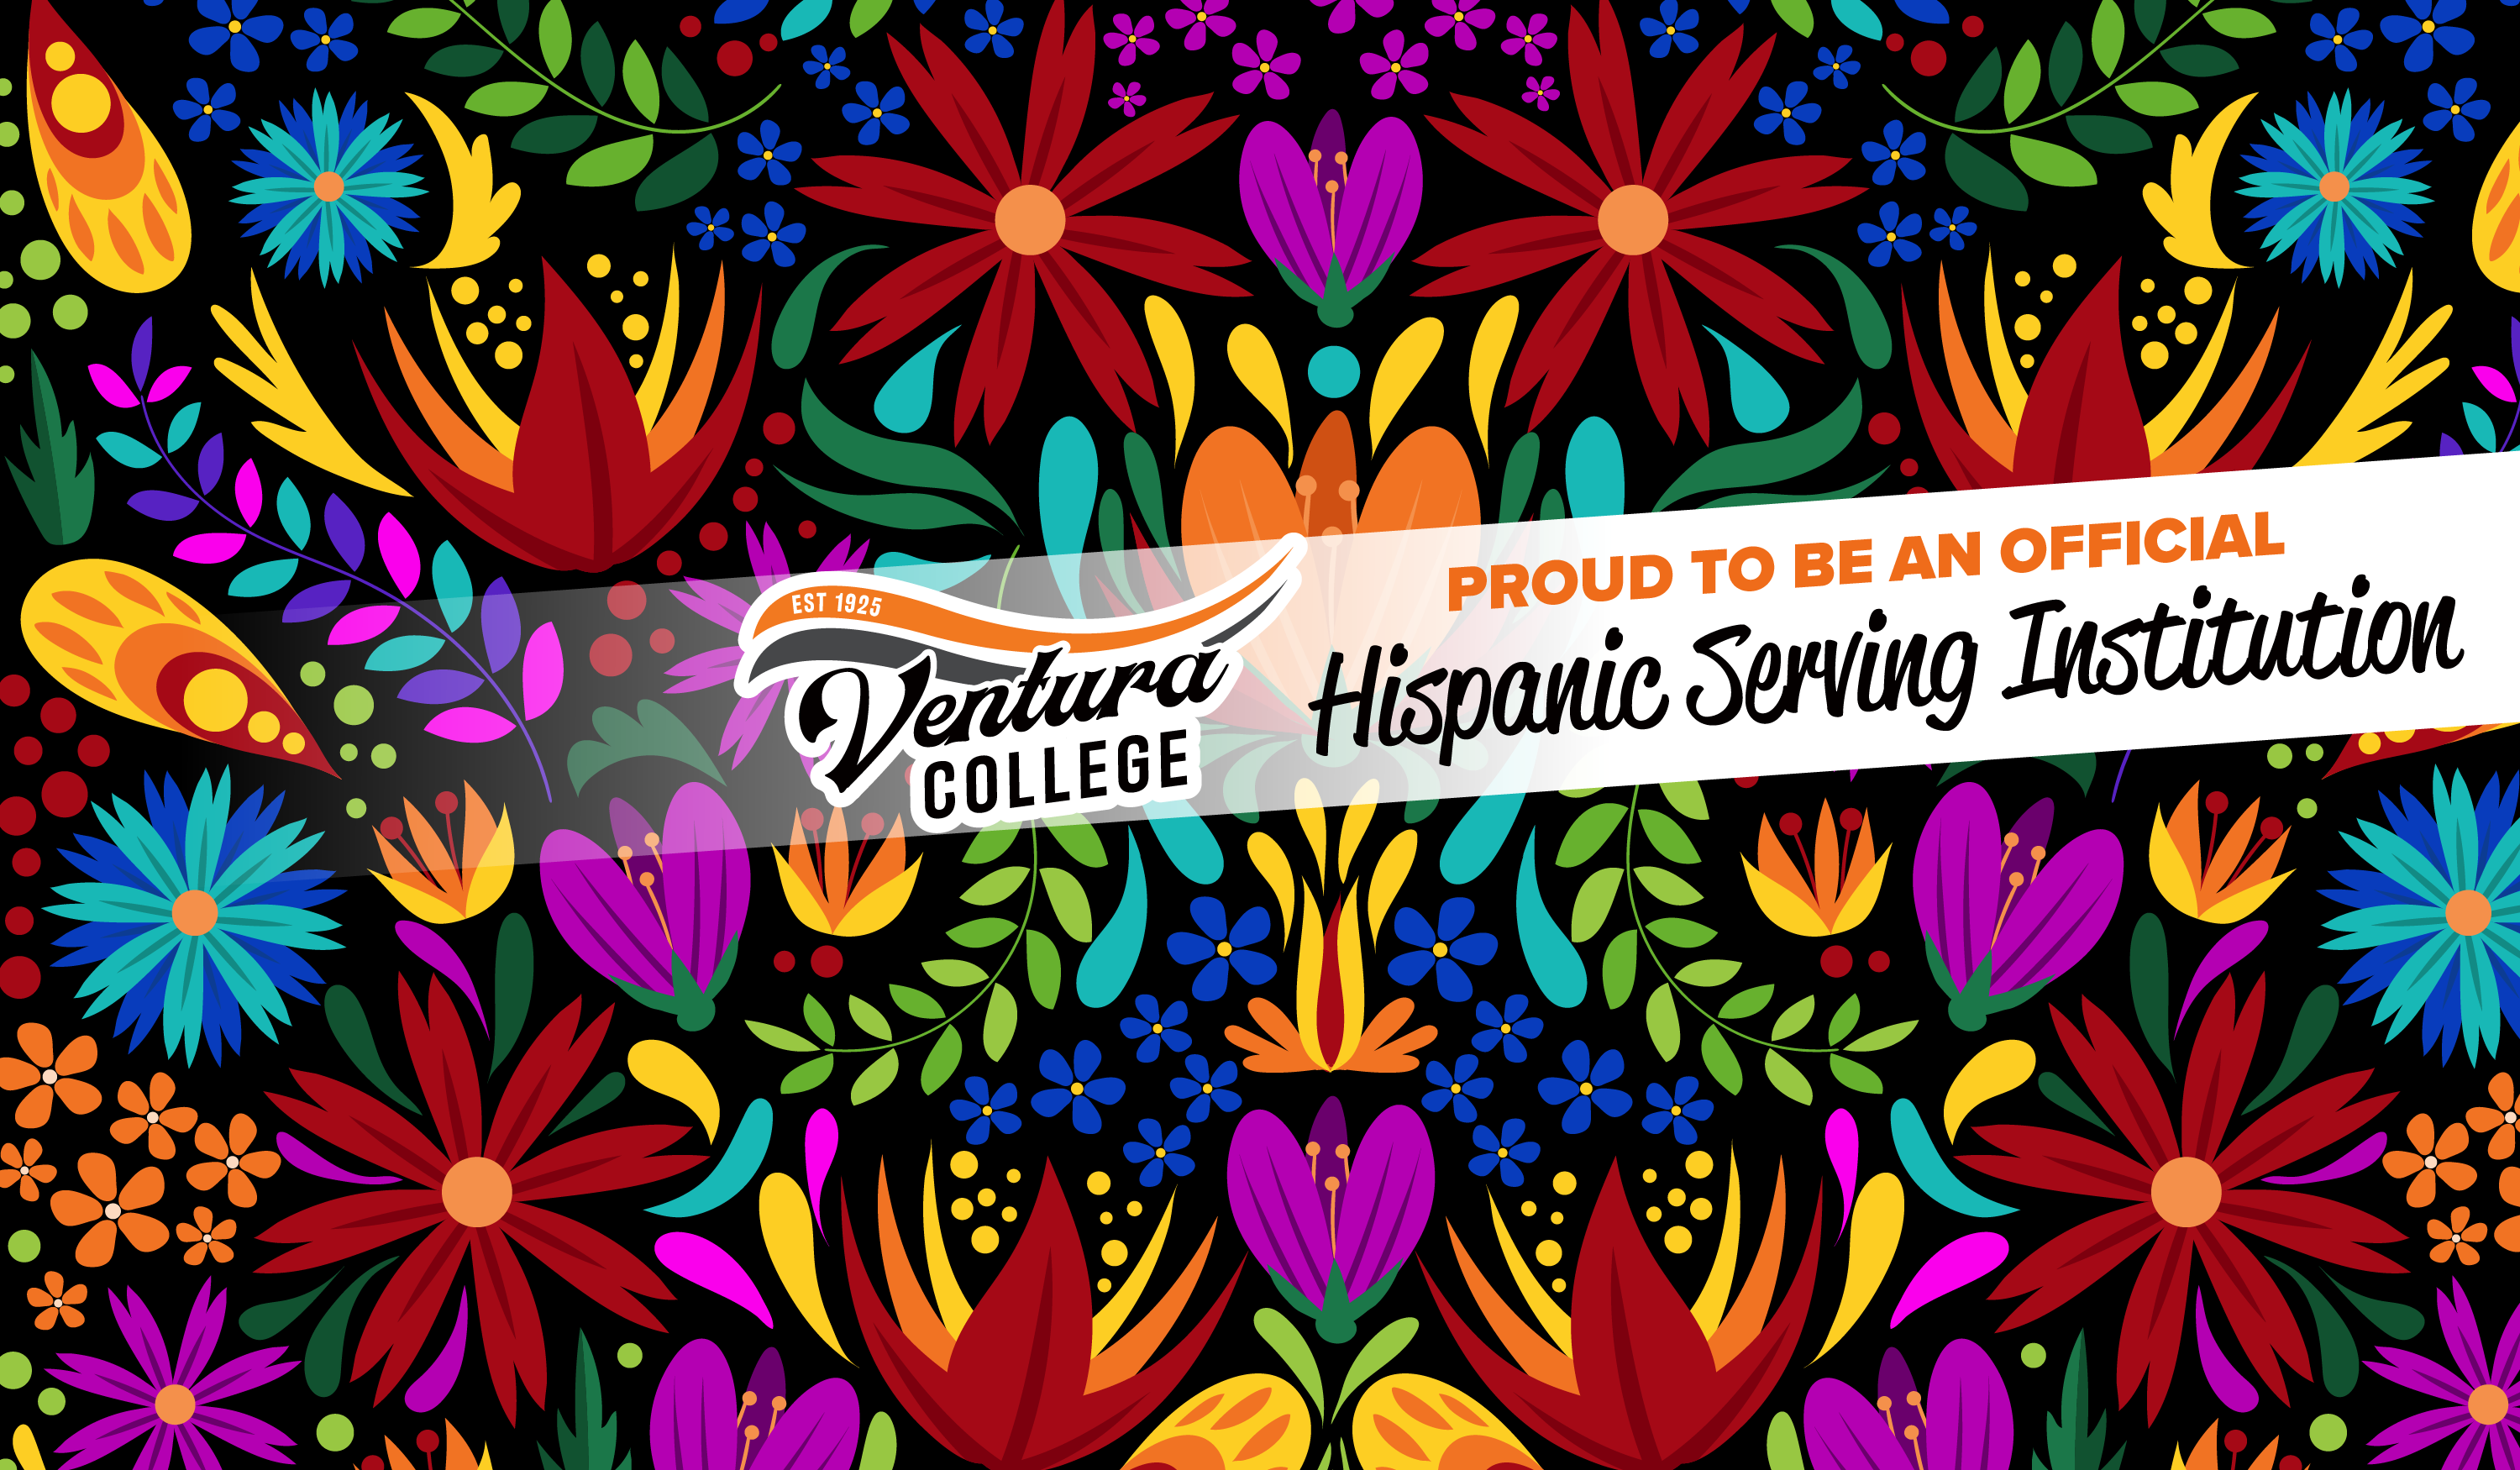 proud to be an official hispanic serving institution